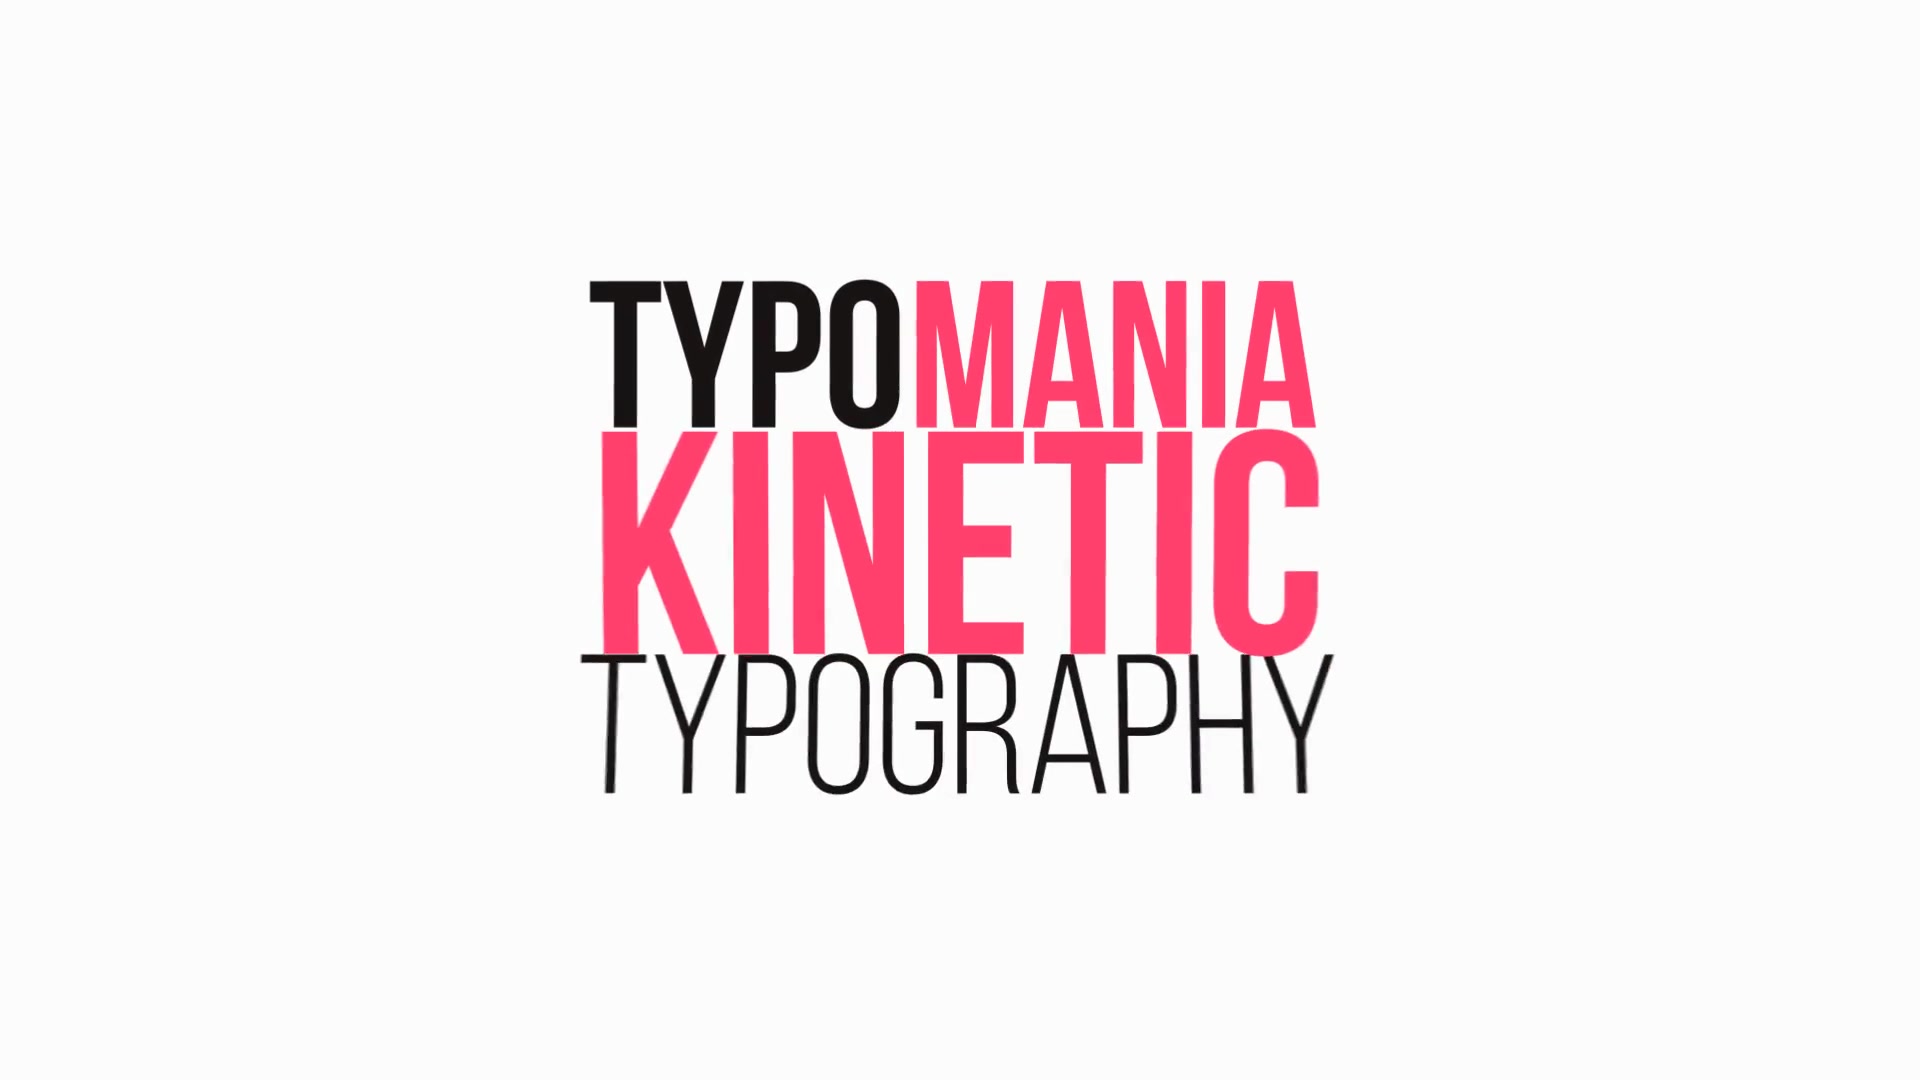 Clean Typography - Download Videohive 18285506